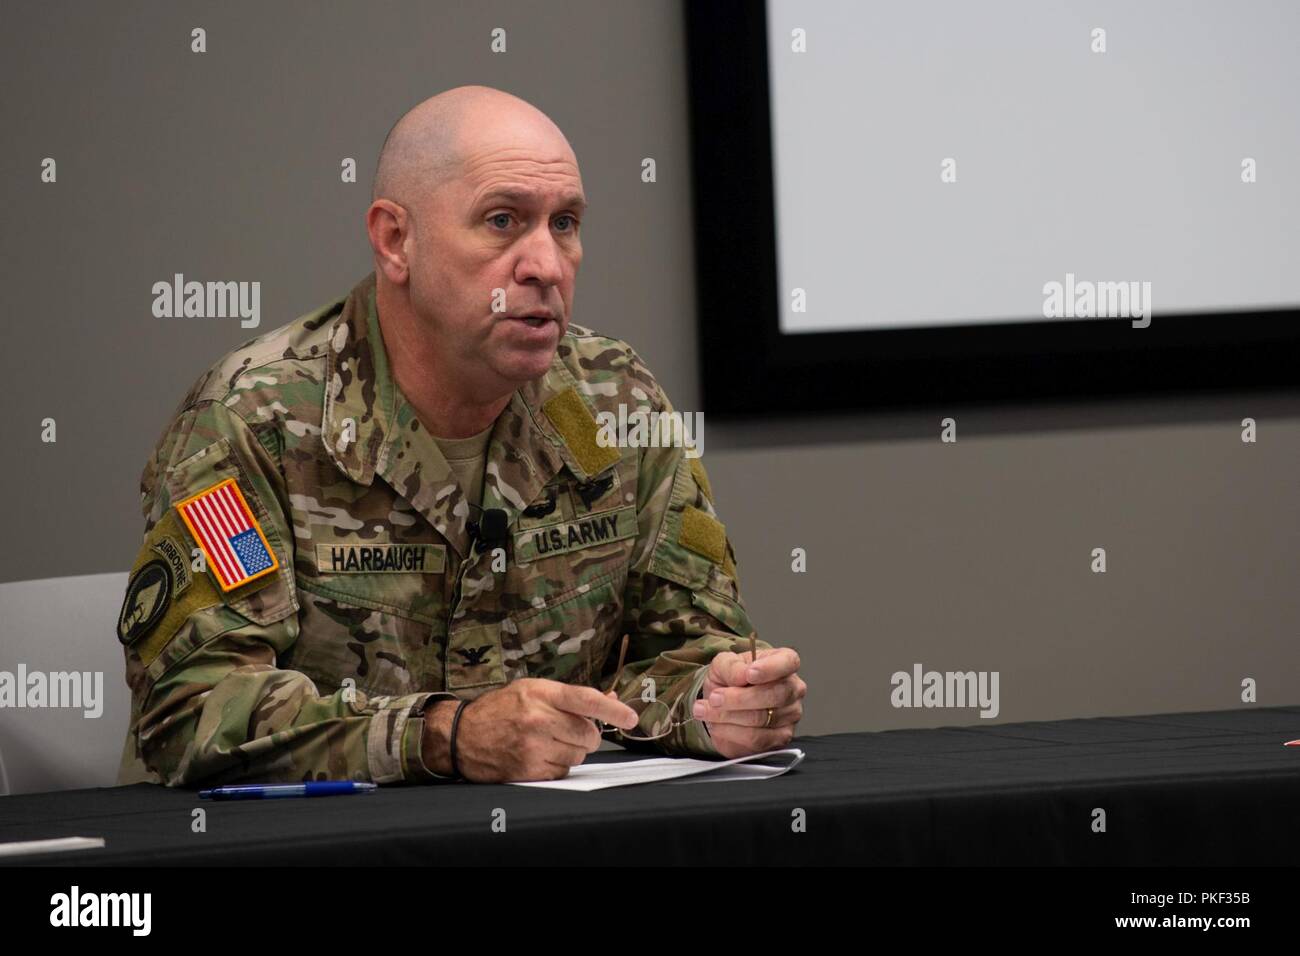 Army Col. Cary Harbaugh, U.S. Special Operations Command Warrior Games 2019 director, briefs local media on the 2019 DoD Warrior Games in Tampa, Fla., Aug. 6, 2018. The games, scheduled from June 21-30, introduce wounded, ill and injured service members and veterans to paralympic-style sports. More than 300 athletes will compete in 14 events located in downtown Tampa and surrounding areas. ( Stock Photo